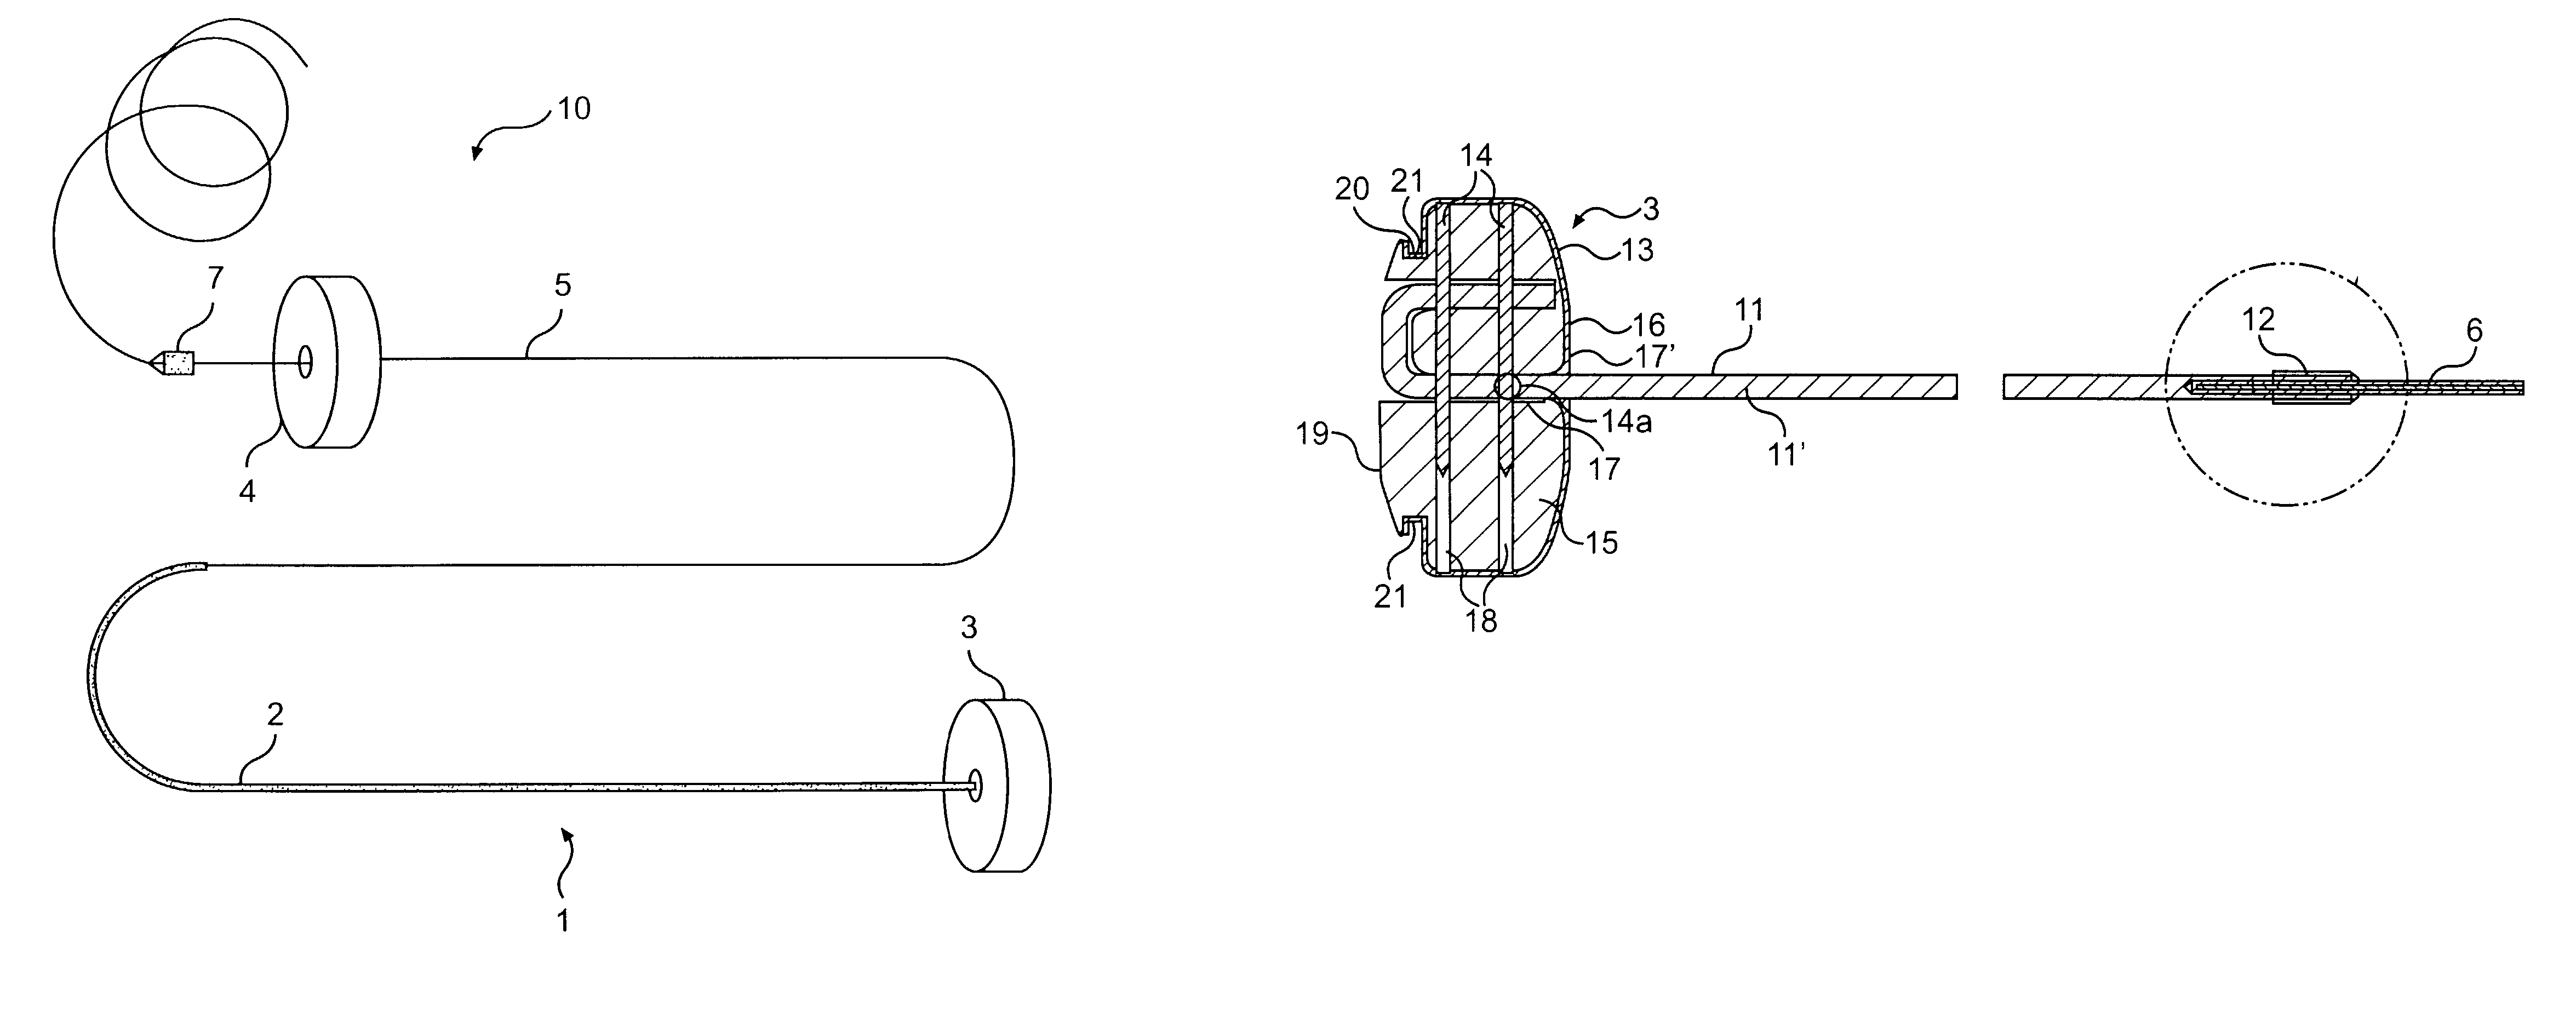 Splint assembly for improving cardiac function in hearts, and method for implanting the splint assembly